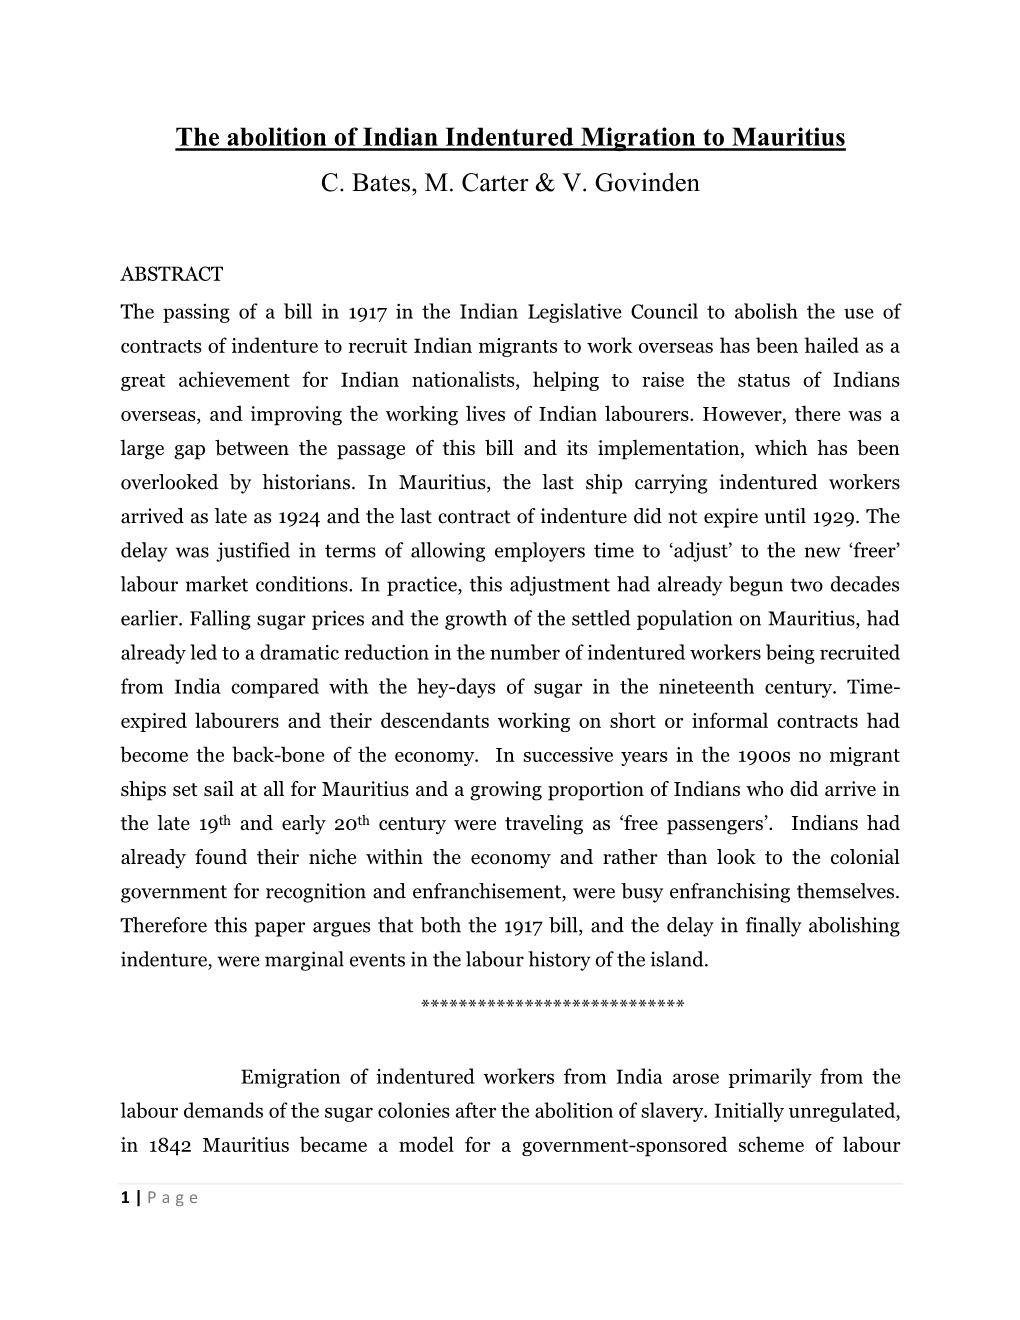 The Abolition of Indian Indentured Migration to Mauritius C. Bates, M